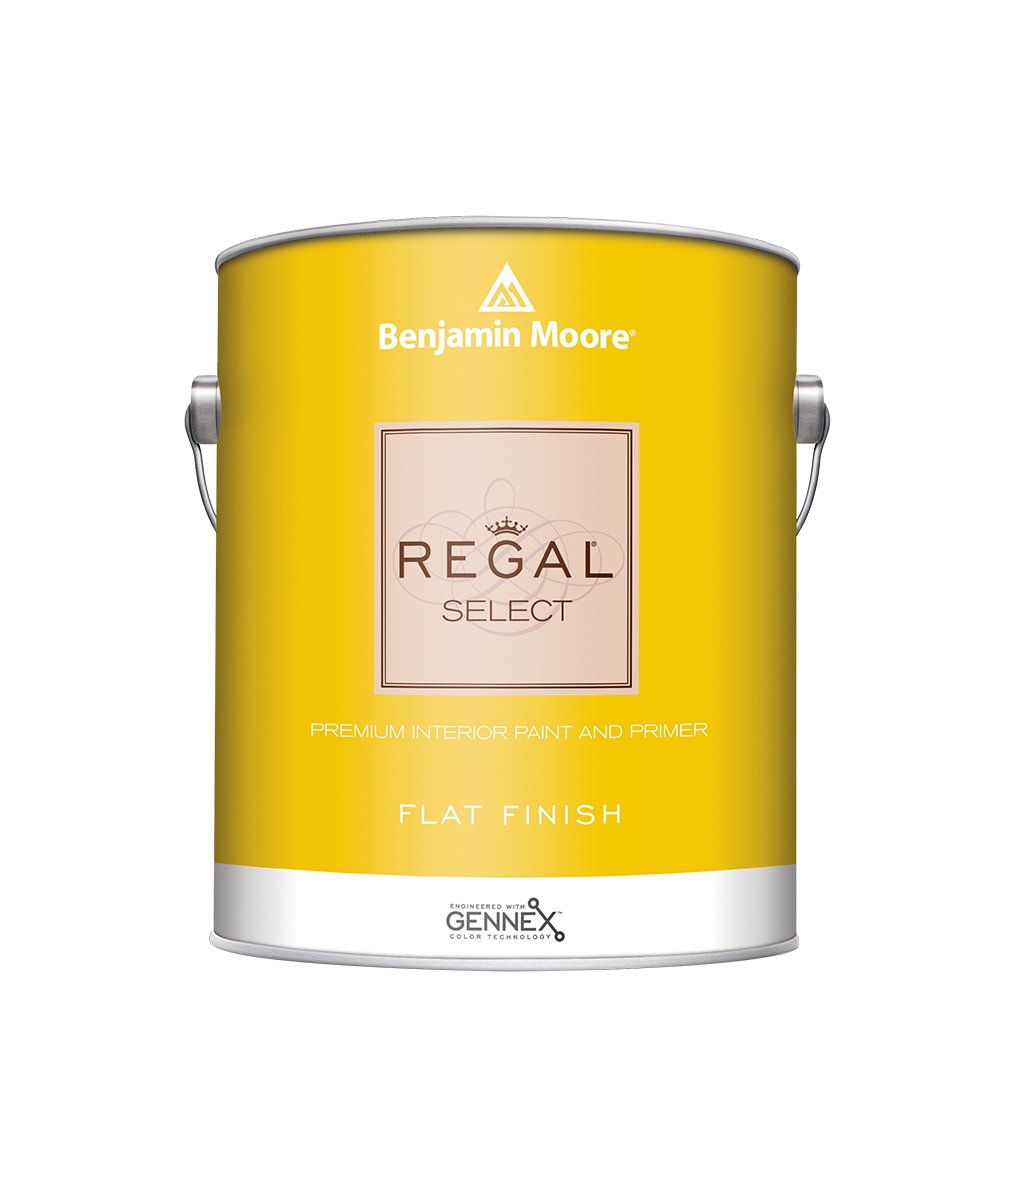 Benjamin Moore Regal Select Flat Paint available at JC Licht.